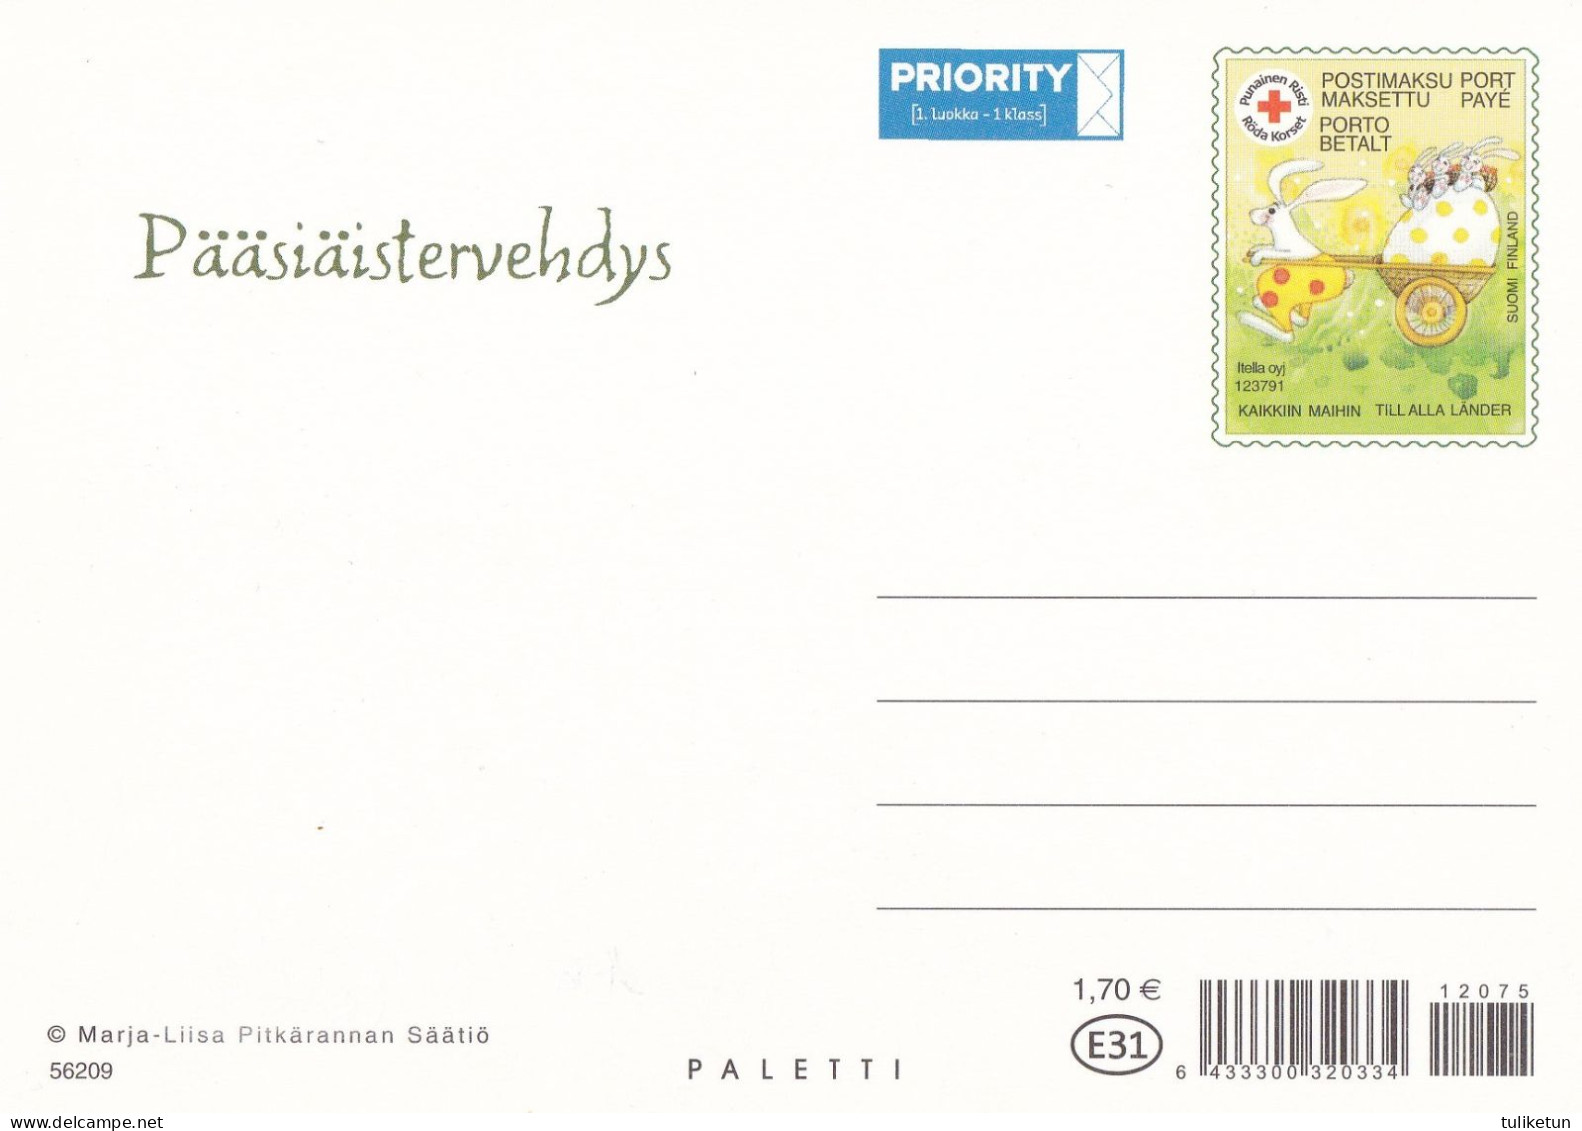 Postal Stationery - Bunny Carrying Chicken Eggs In Wheelbarrow - Red Cross  - Suomi Finland - Postage Paid - Postal Stationery